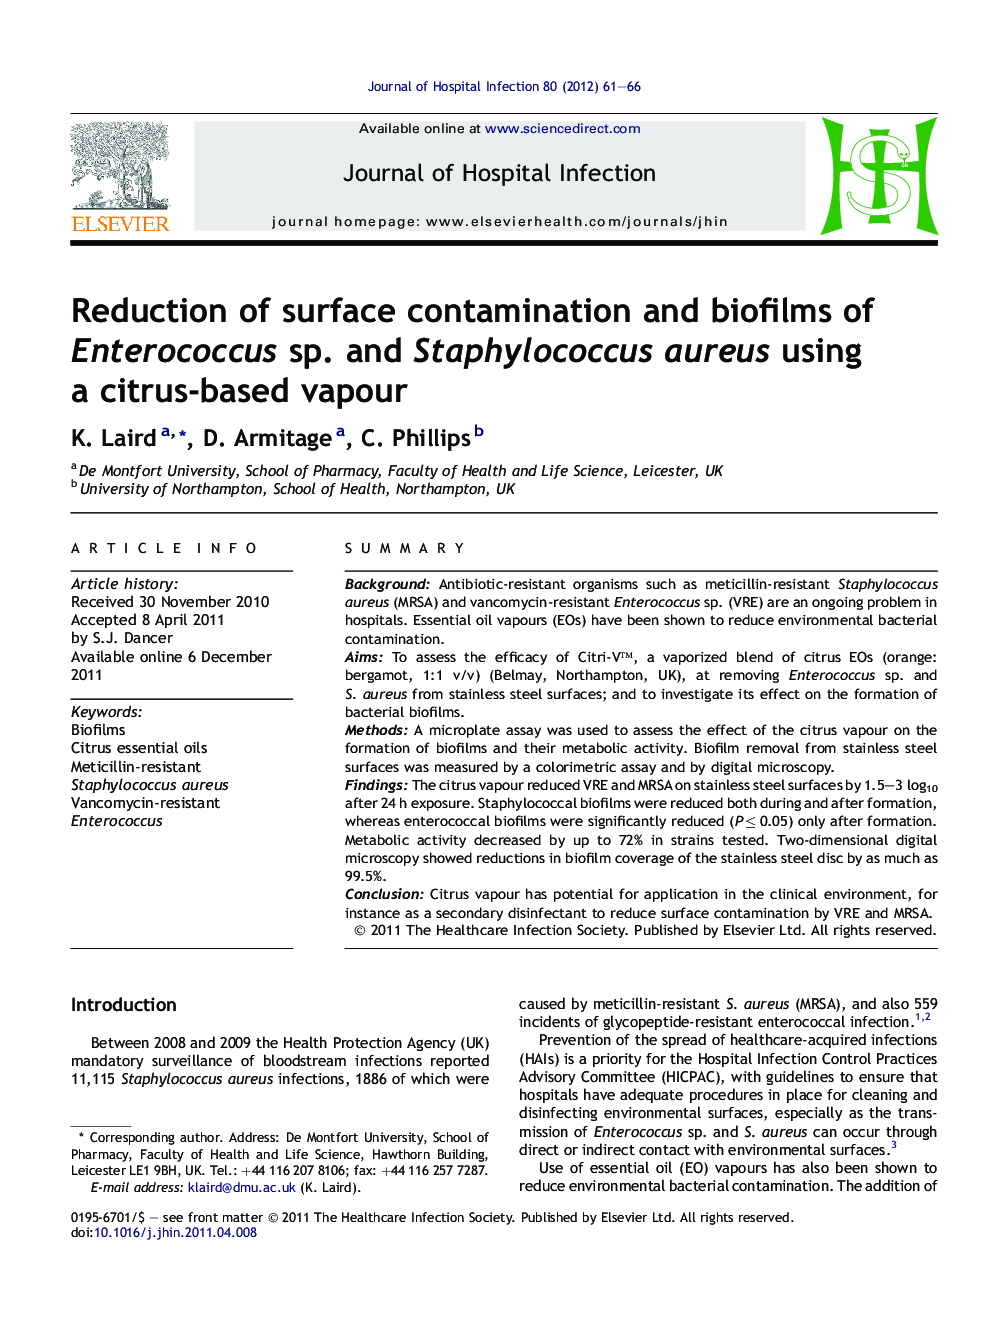 Reduction of surface contamination and biofilms of Enterococcus sp. and Staphylococcus aureus using a citrus-based vapour